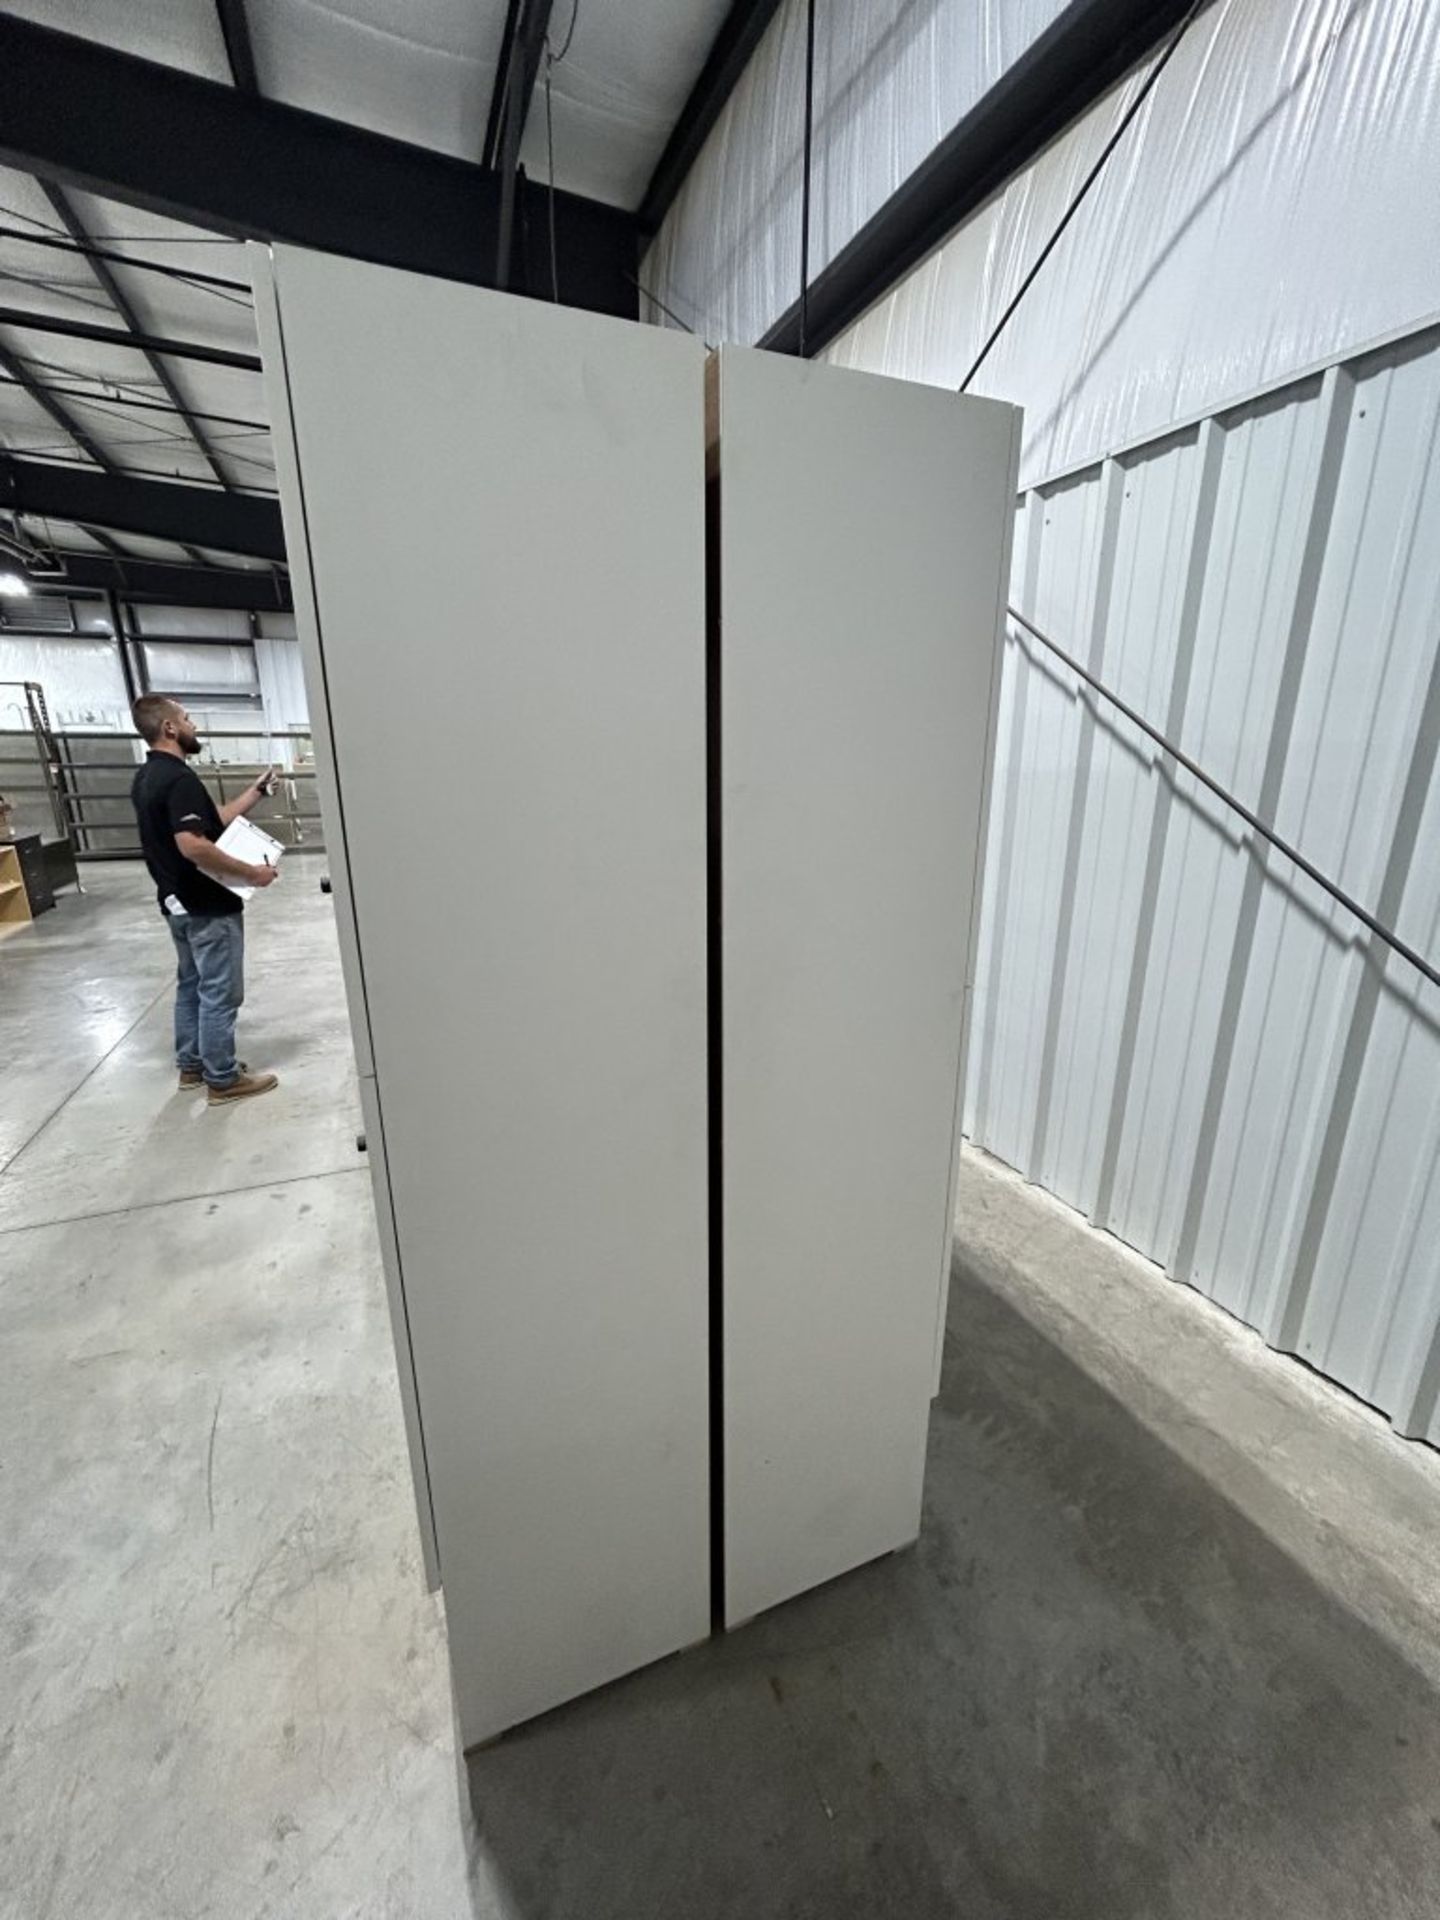 LOT OF (2) MATCHING METAL LOCKER UNITS, 69-1/2'' WIDE X 78'' TALL X 18'' DEEP, AND (2) MATCHING - Image 9 of 9